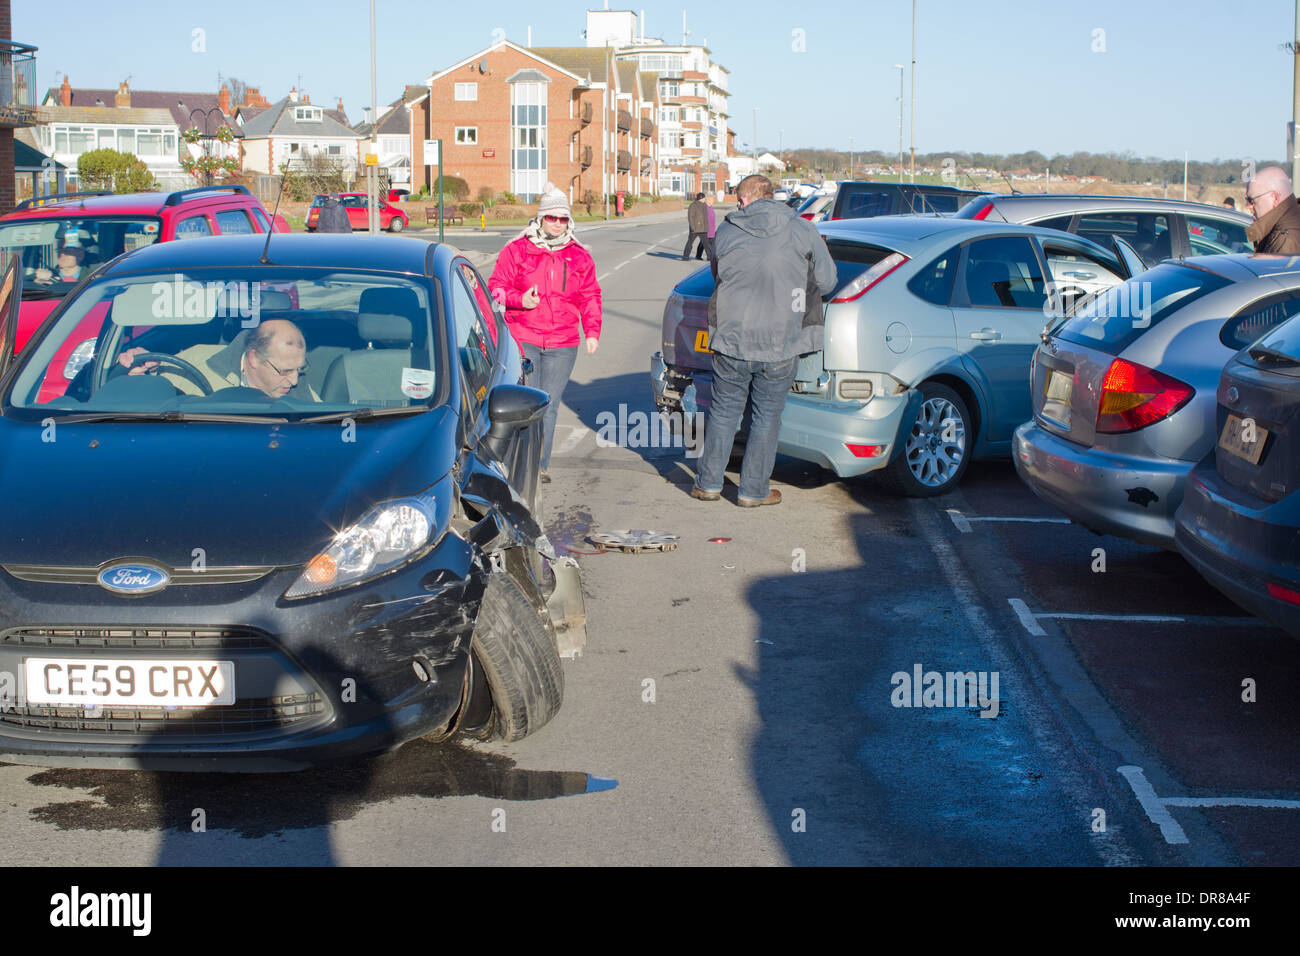 Traffic Incident a car appears to have reversed into the path of another car colliding extensive frontal damage Stock Photo